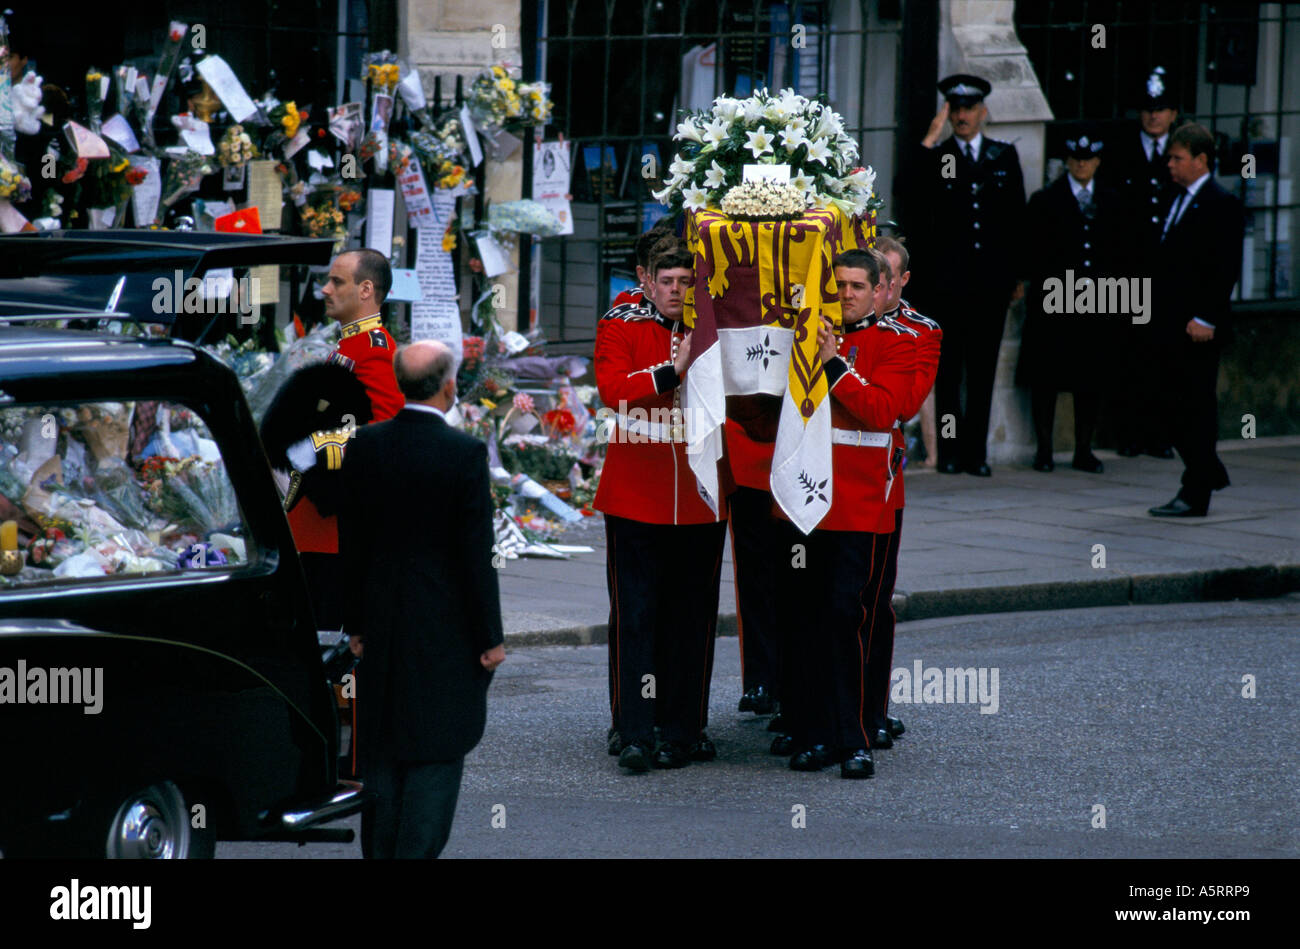 DEATH OF DIANA PRINCESS OF WALES AT HER FUNERAL AT WESTMINSTER ABBEY Stock Photo